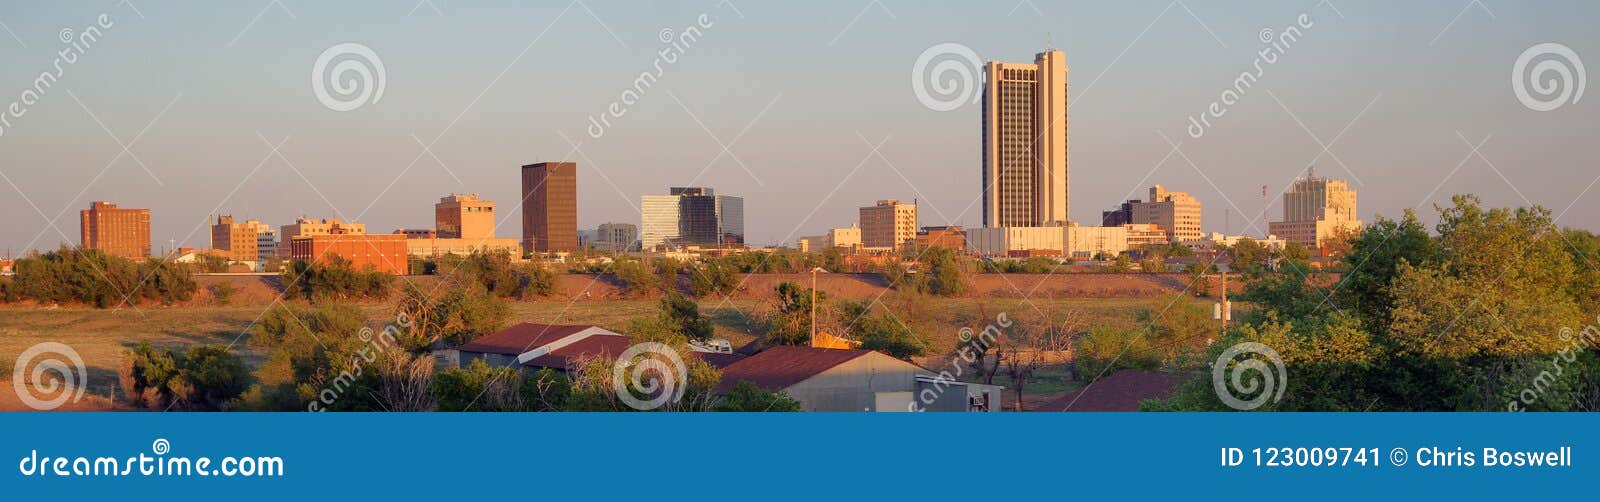 golden light hits the buildings and landscape of amarillo texas